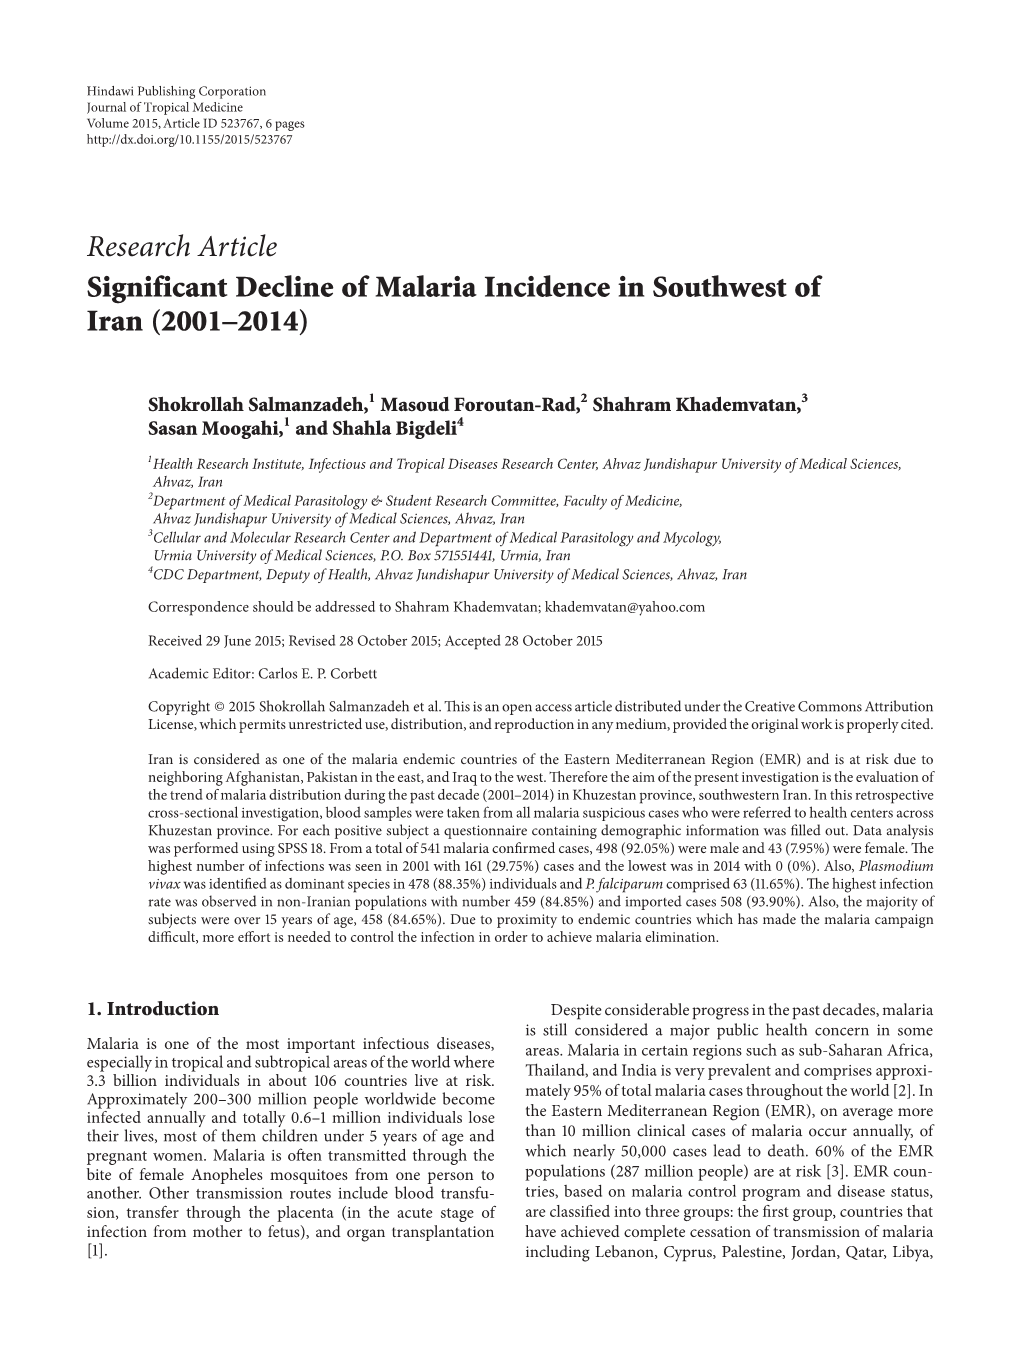 Research Article Significant Decline of Malaria Incidence in Southwest of Iran (2001–2014)